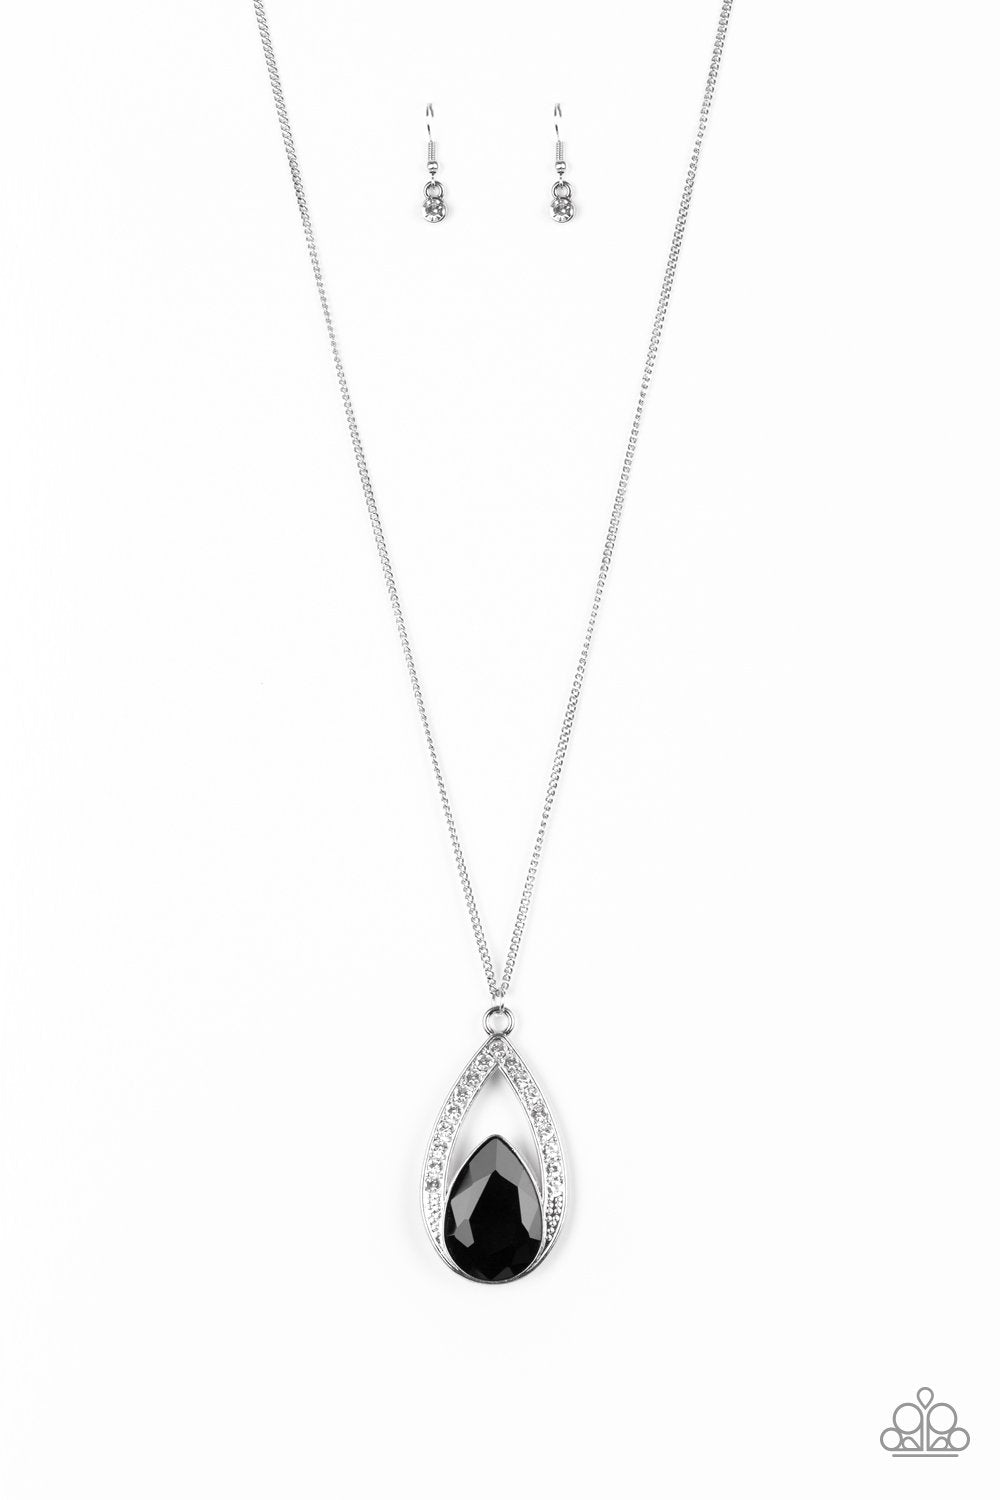 Notorious Noble Black Rhinestone Pendant Necklace - Paparazzi Accessories-CarasShop.com - $5 Jewelry by Cara Jewels